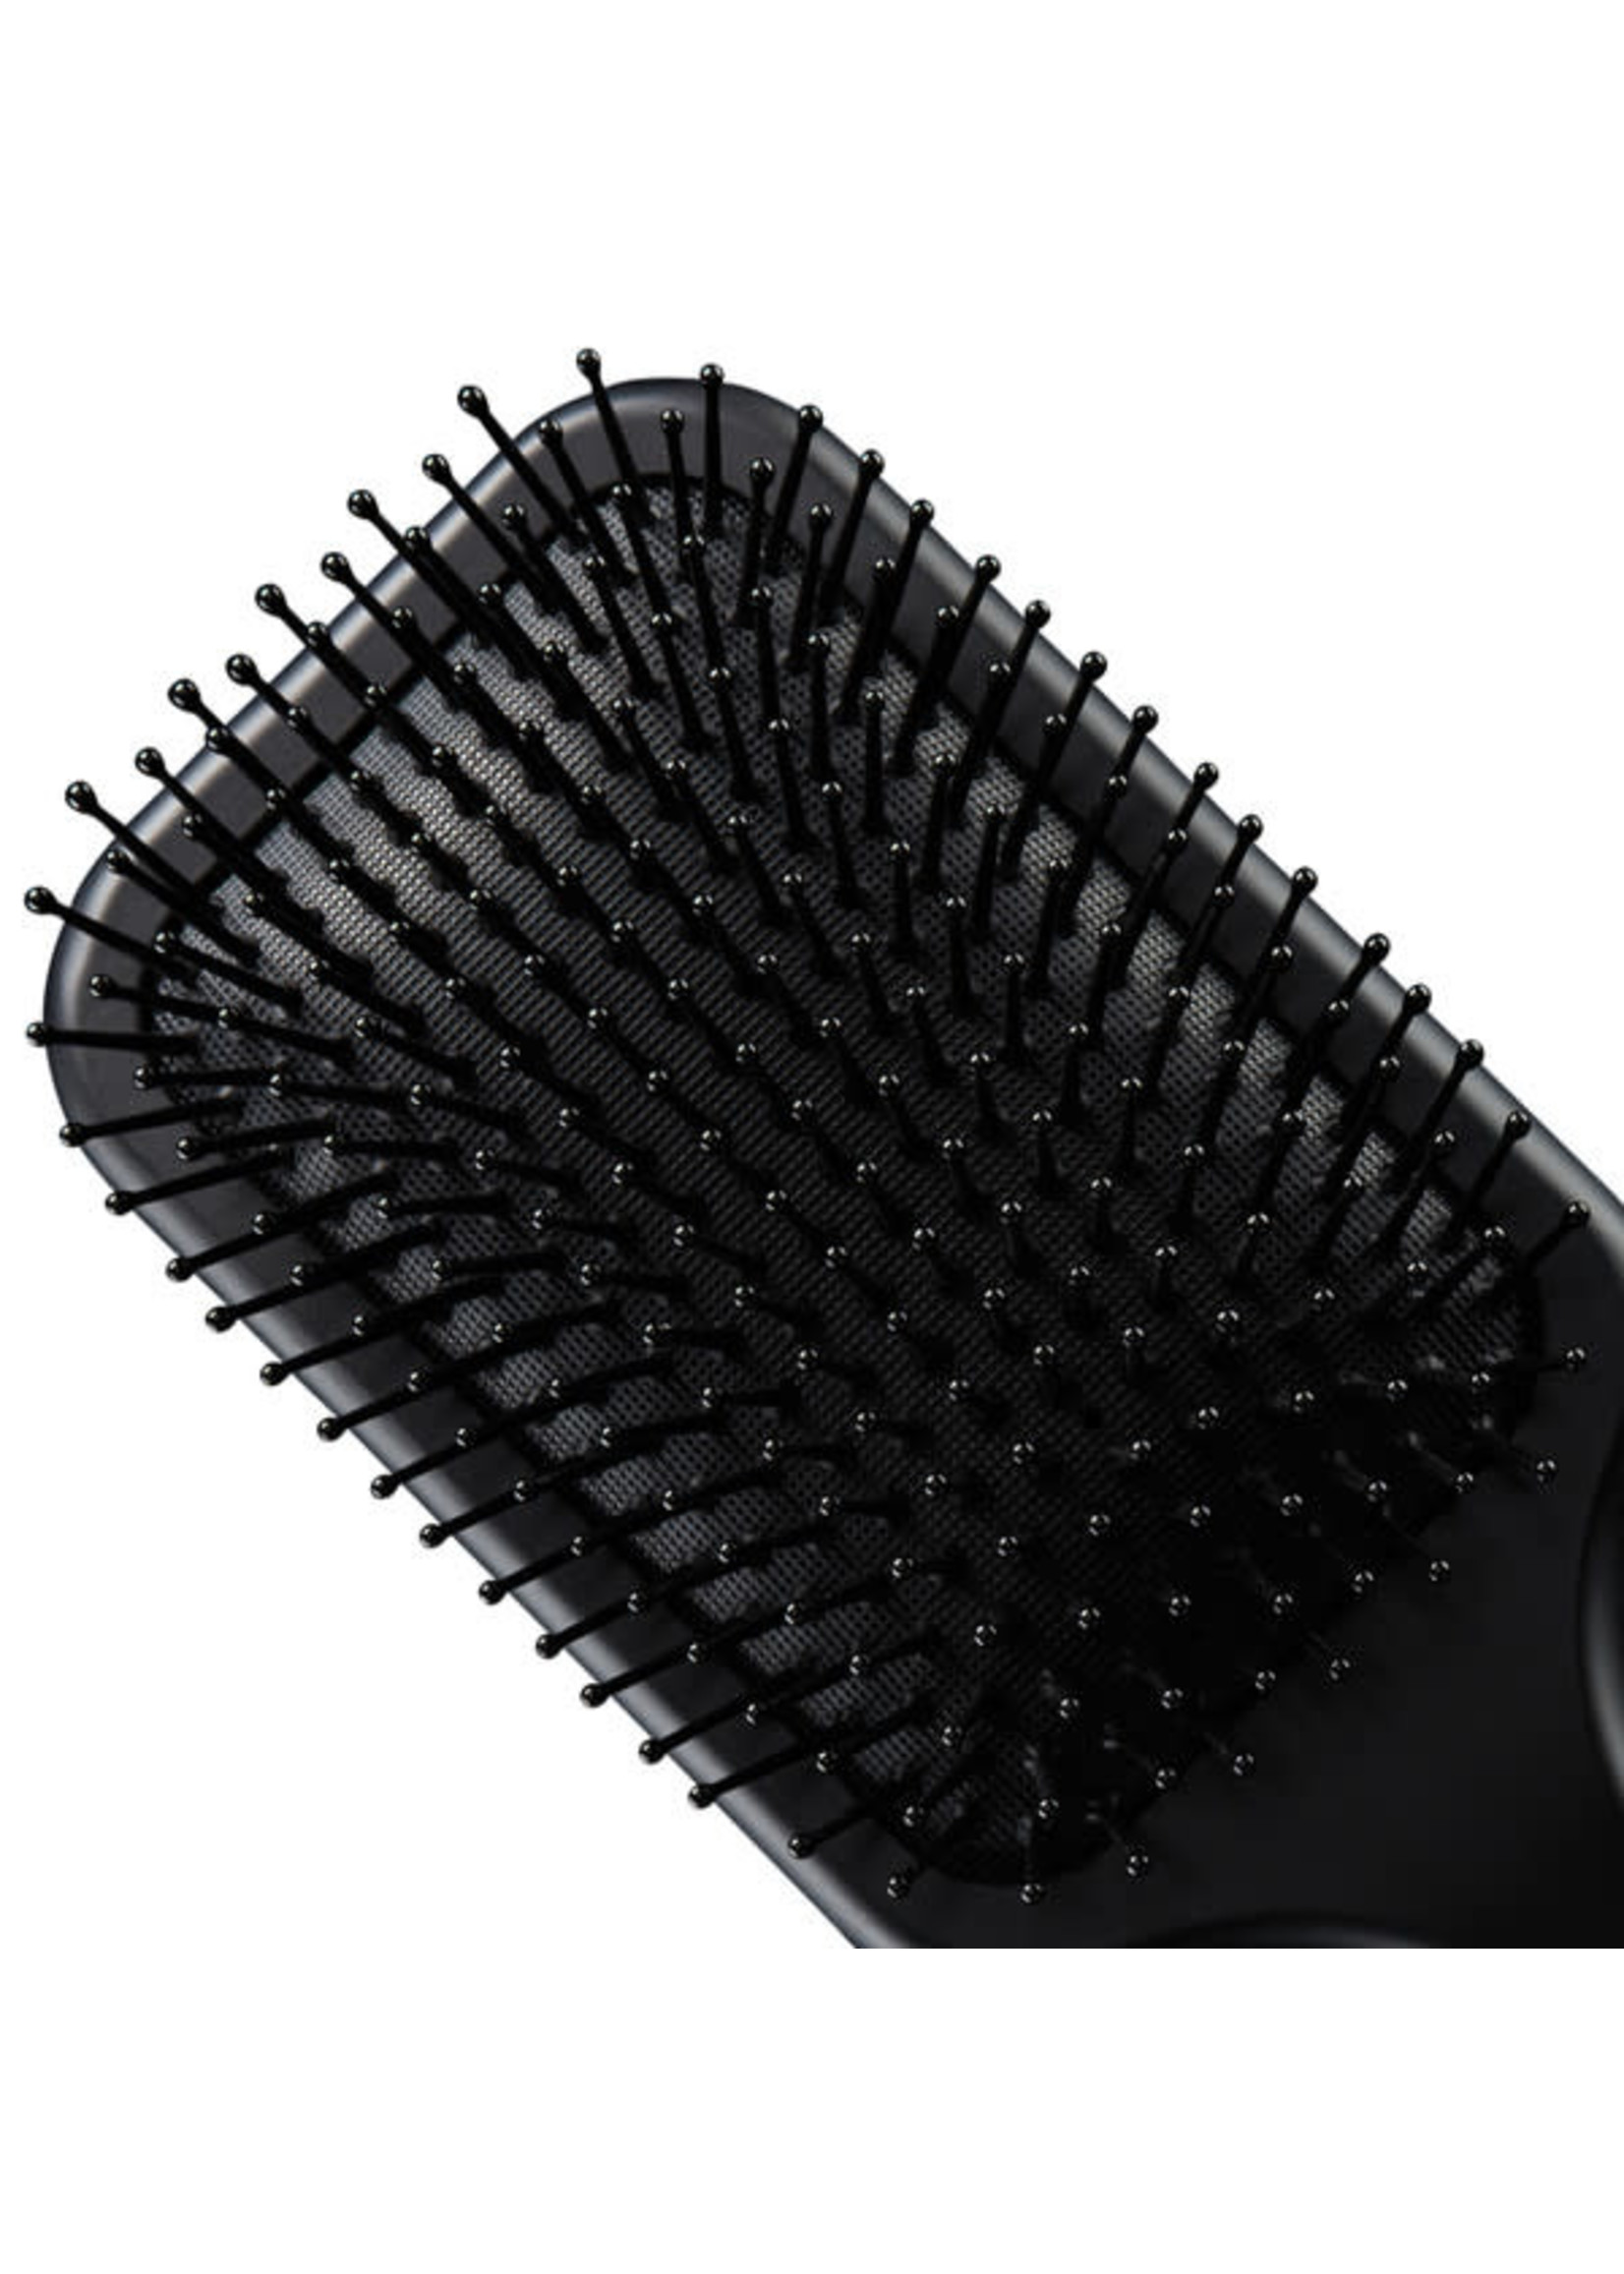 GHD GHD The All Rounder Paddle Brush